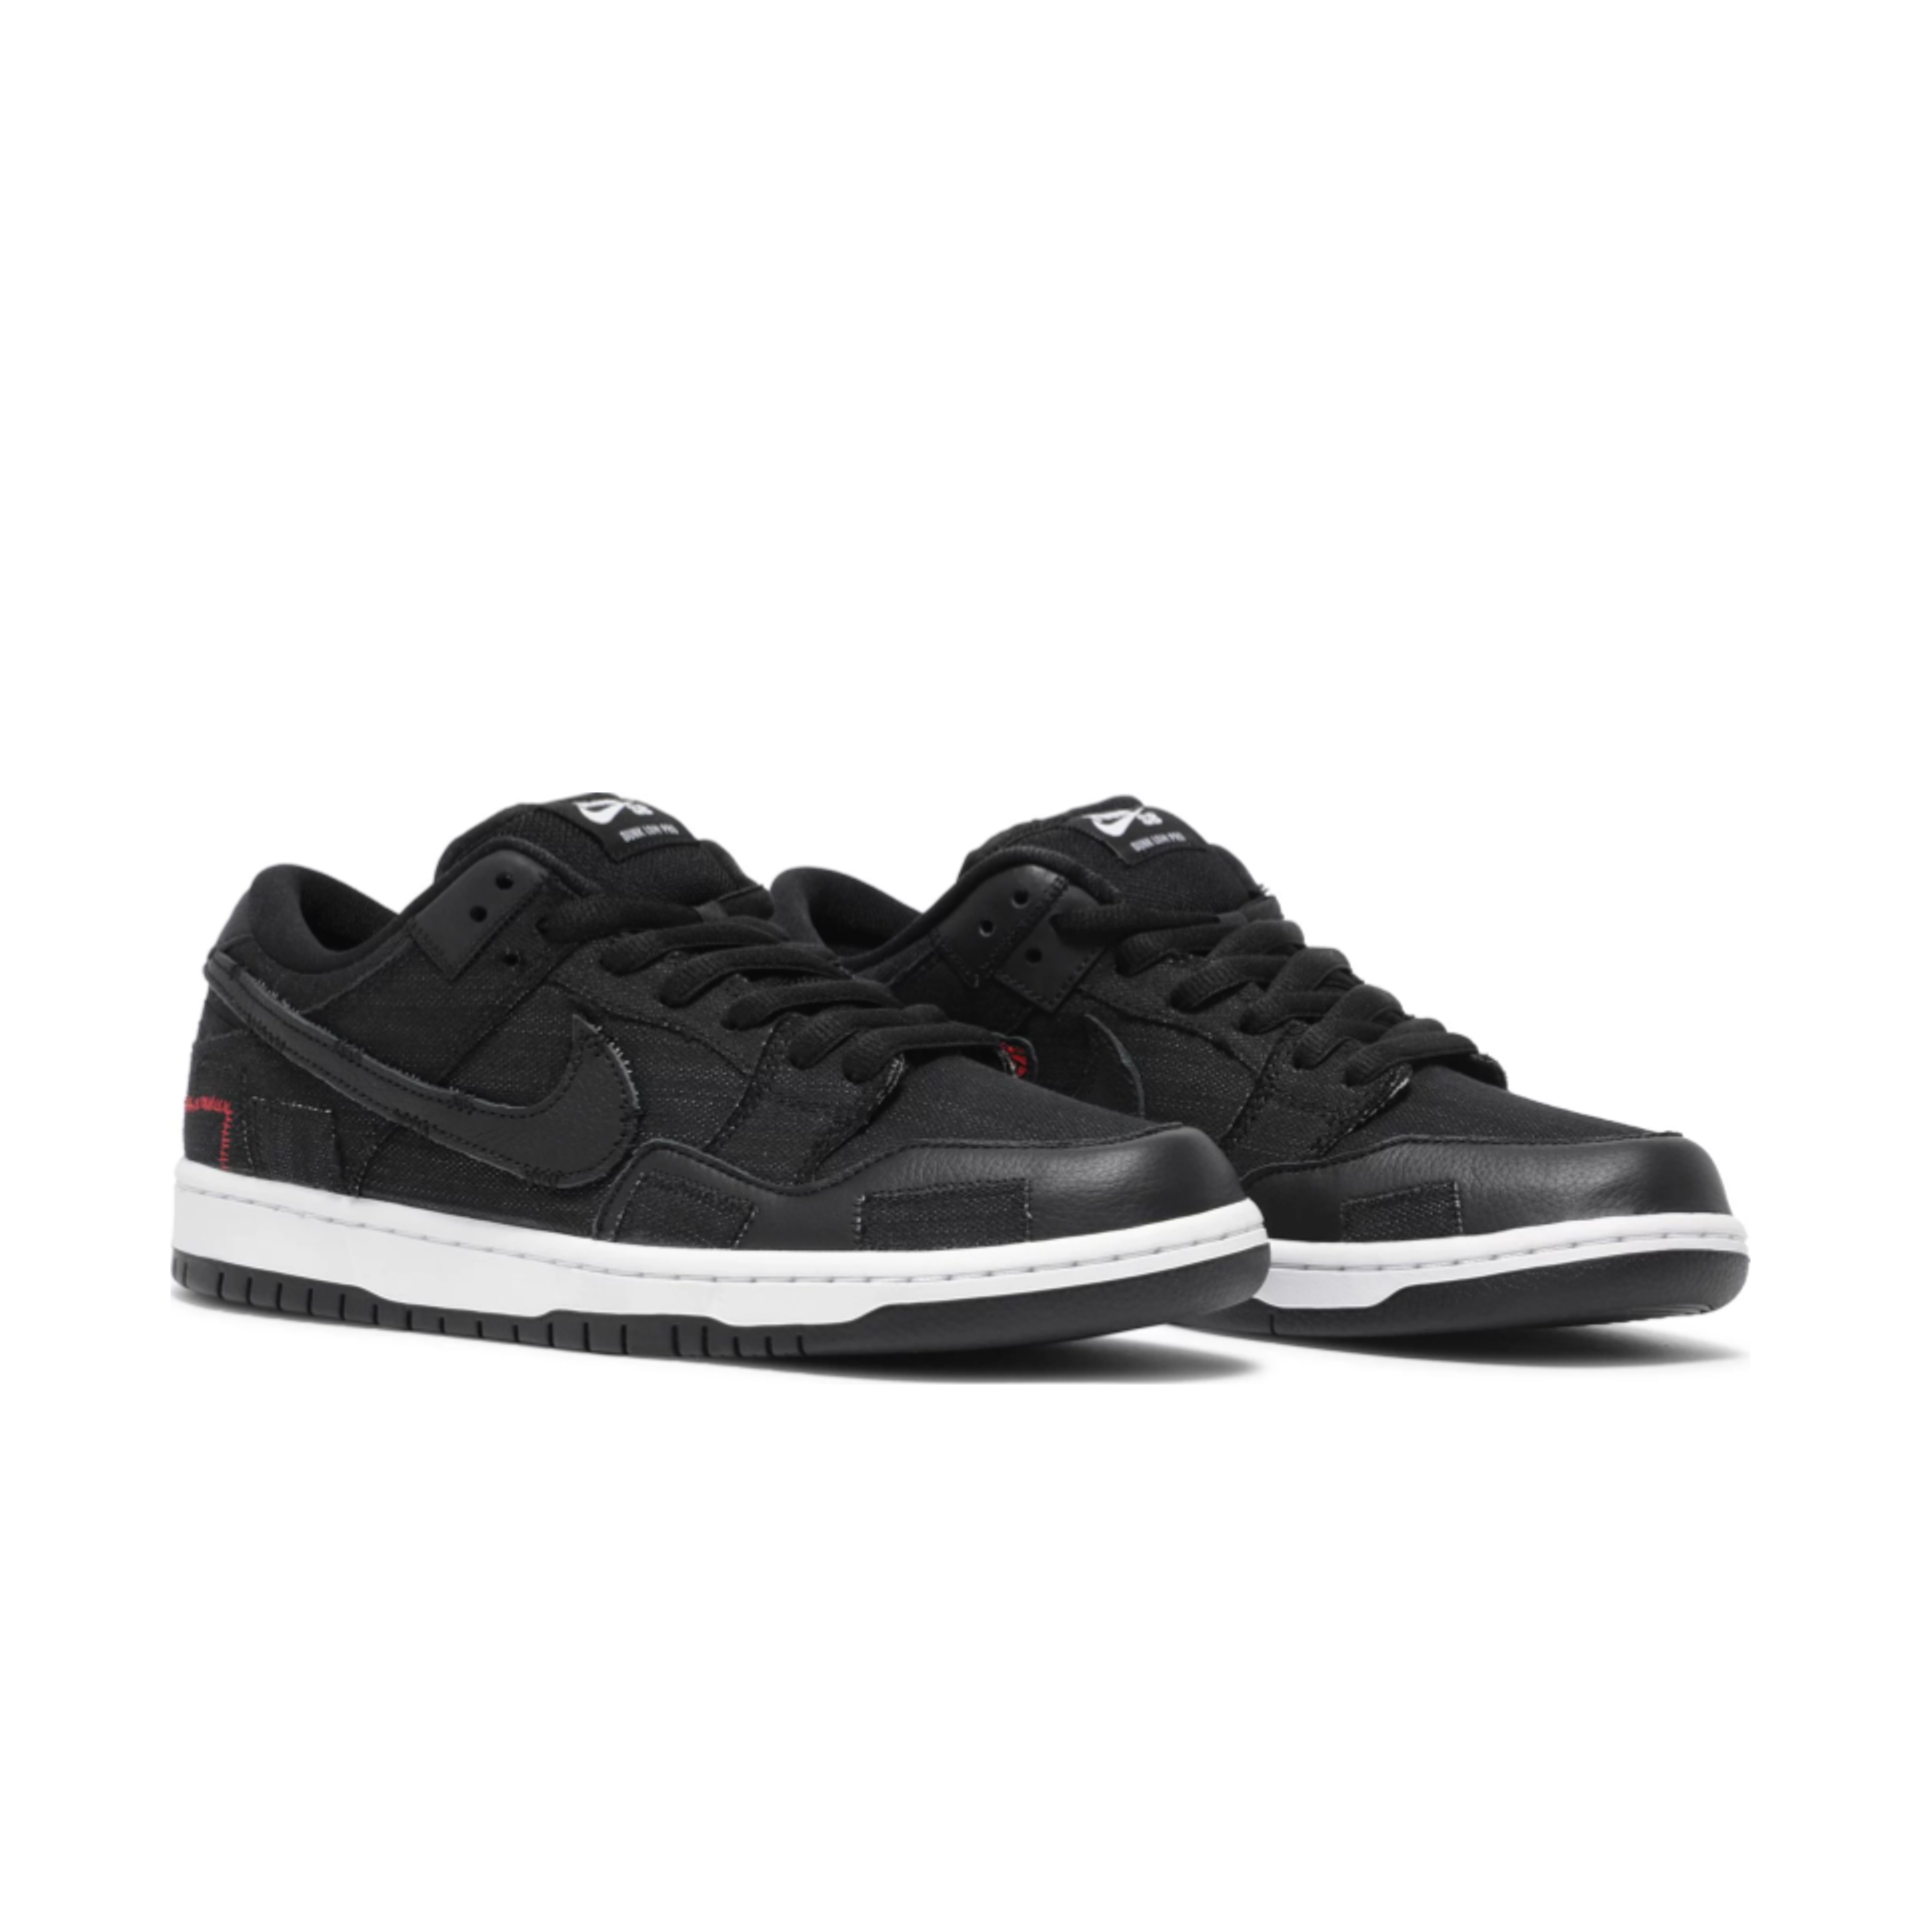 Nike Wasted Youth x Dunk Low SB